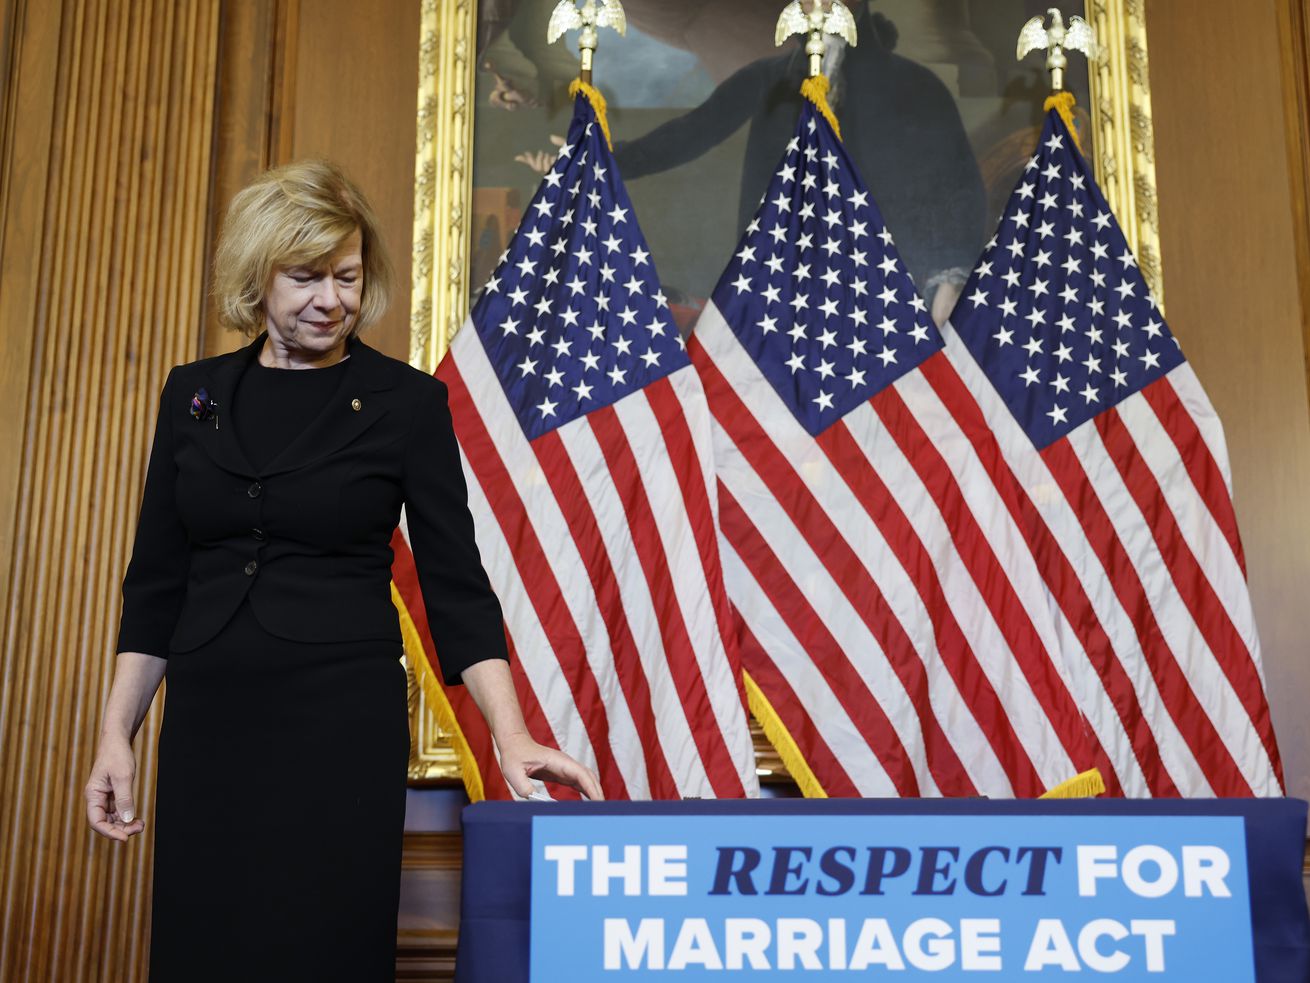 Sen. Tammy Baldwin reflects on why the Respect for Marriage Act is necessary